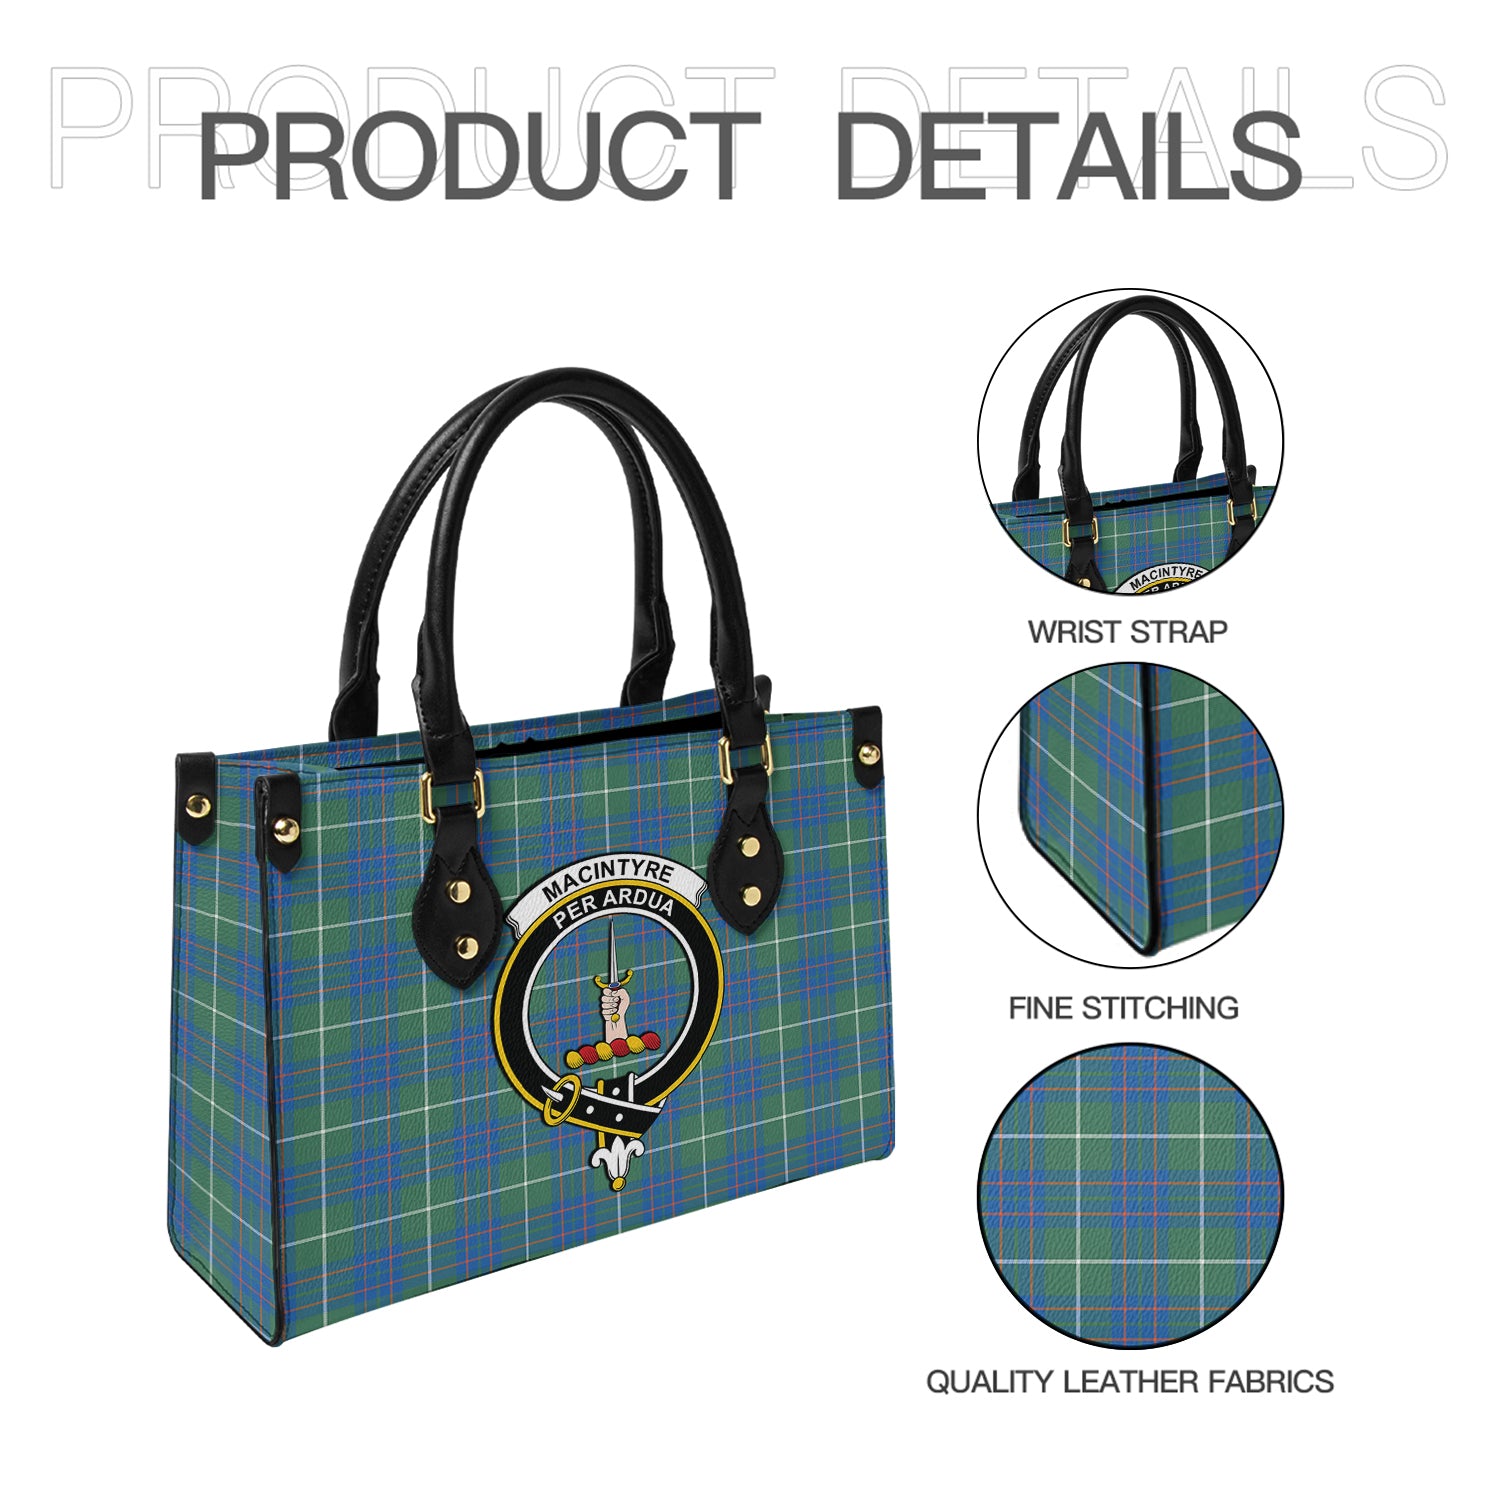 macintyre-hunting-ancient-tartan-leather-bag-with-family-crest